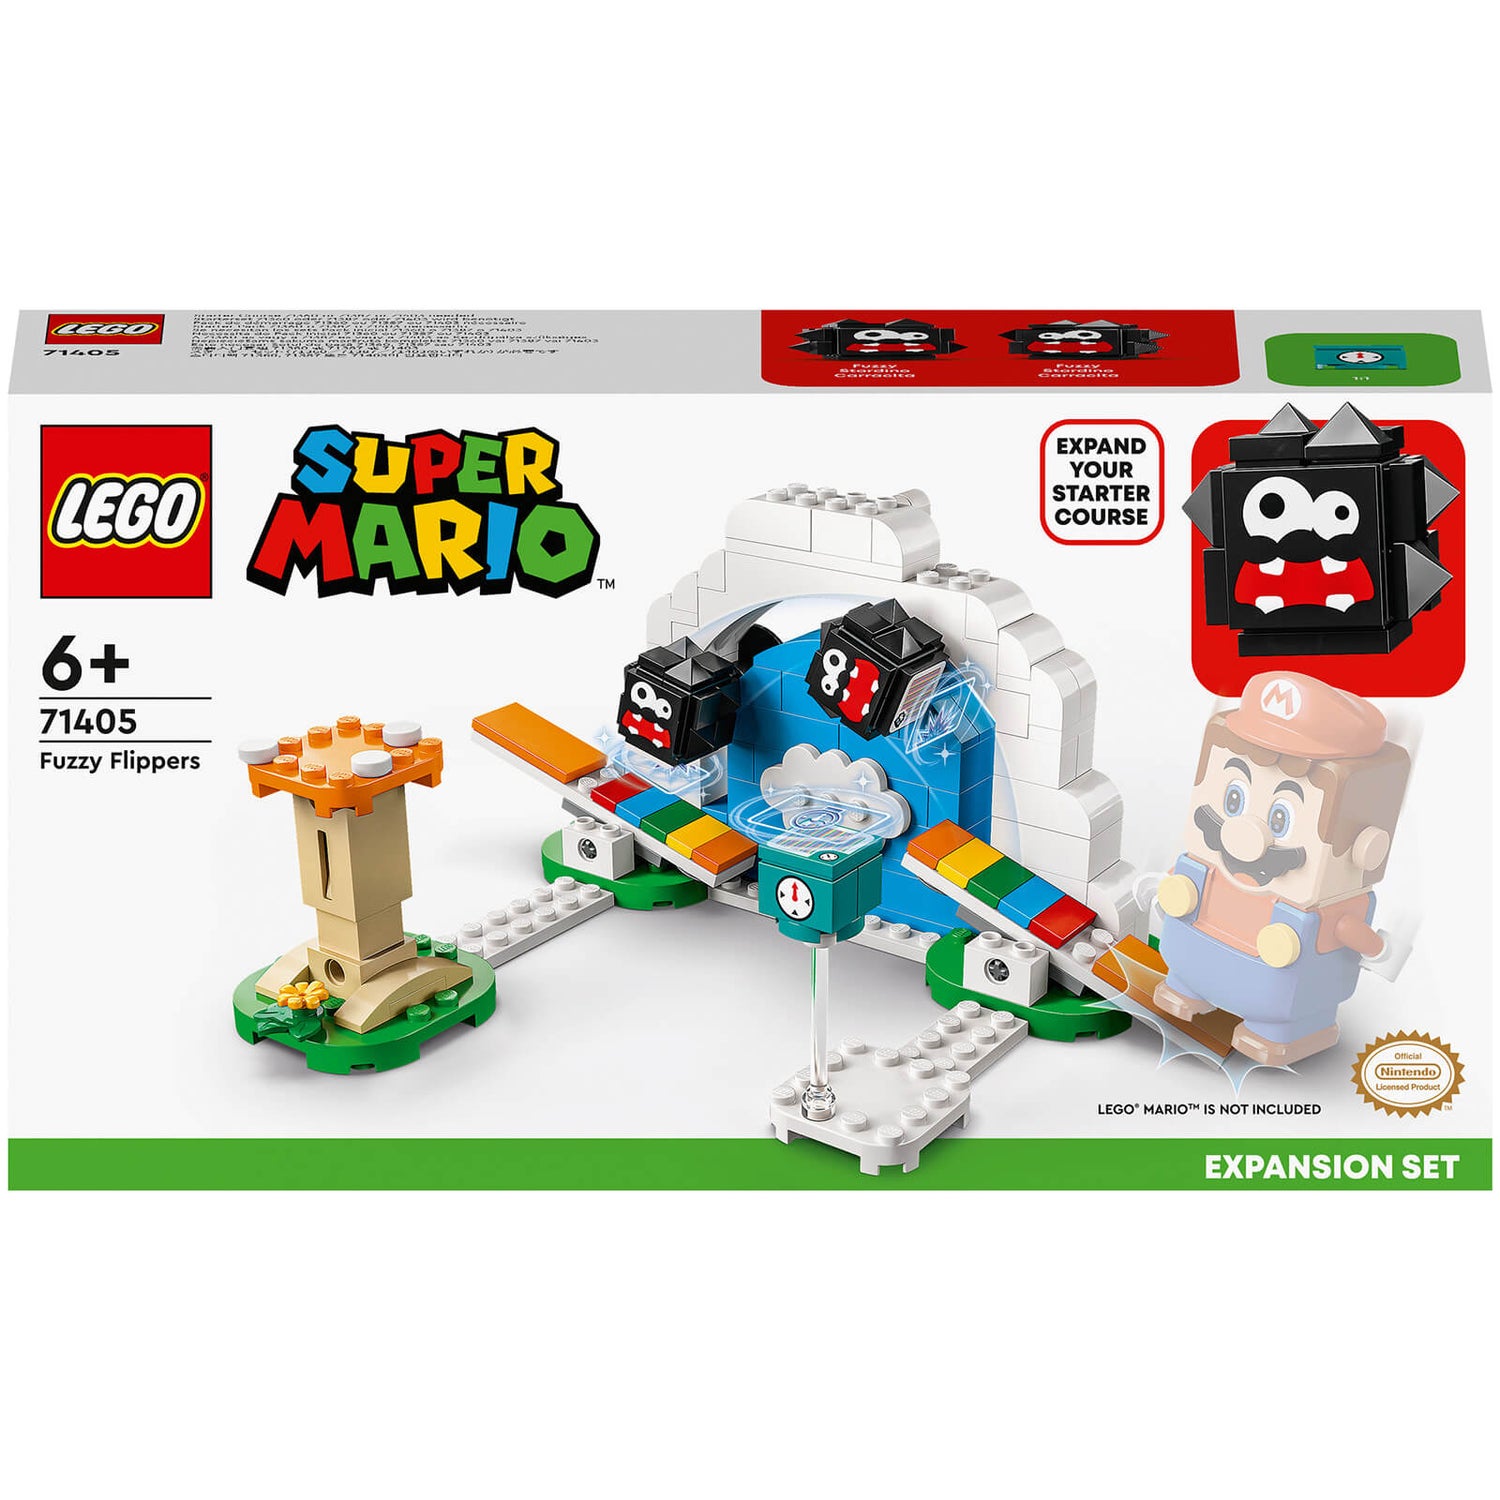 LEGO Super Mario Action into the Sky with the Fuzzy Flippers Expansion Set (71405)